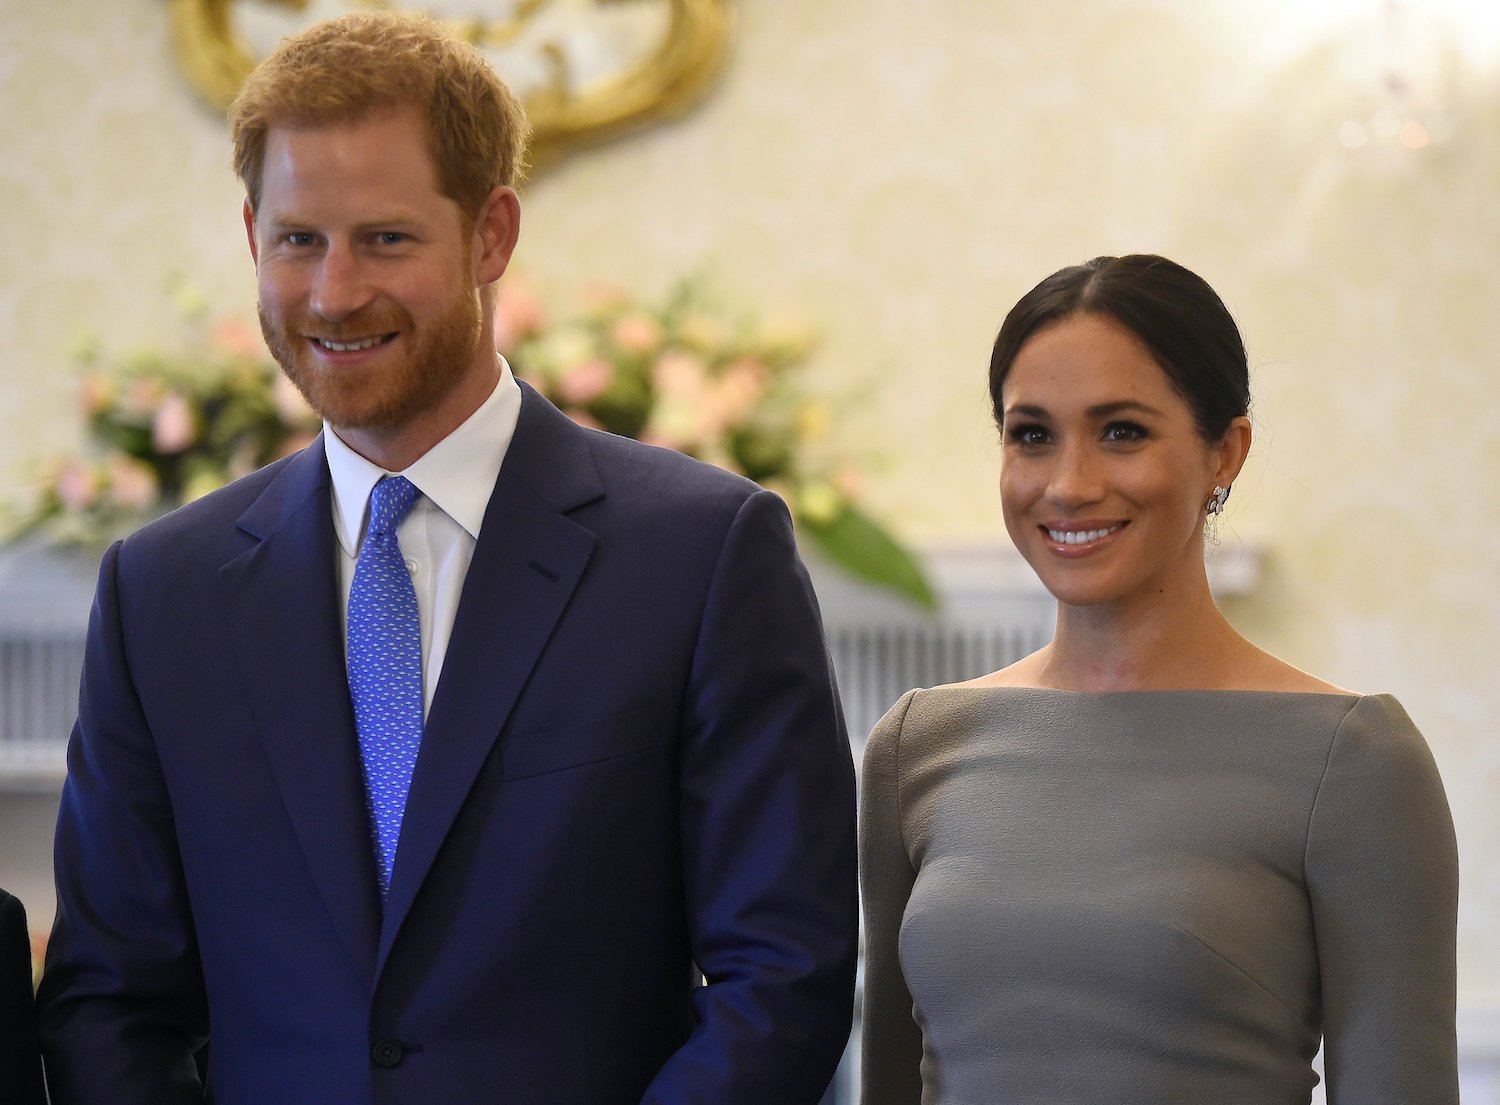 Prince Harry and Meghan Markle smile as they arrive to meet Ireland's President, Michael Higgins